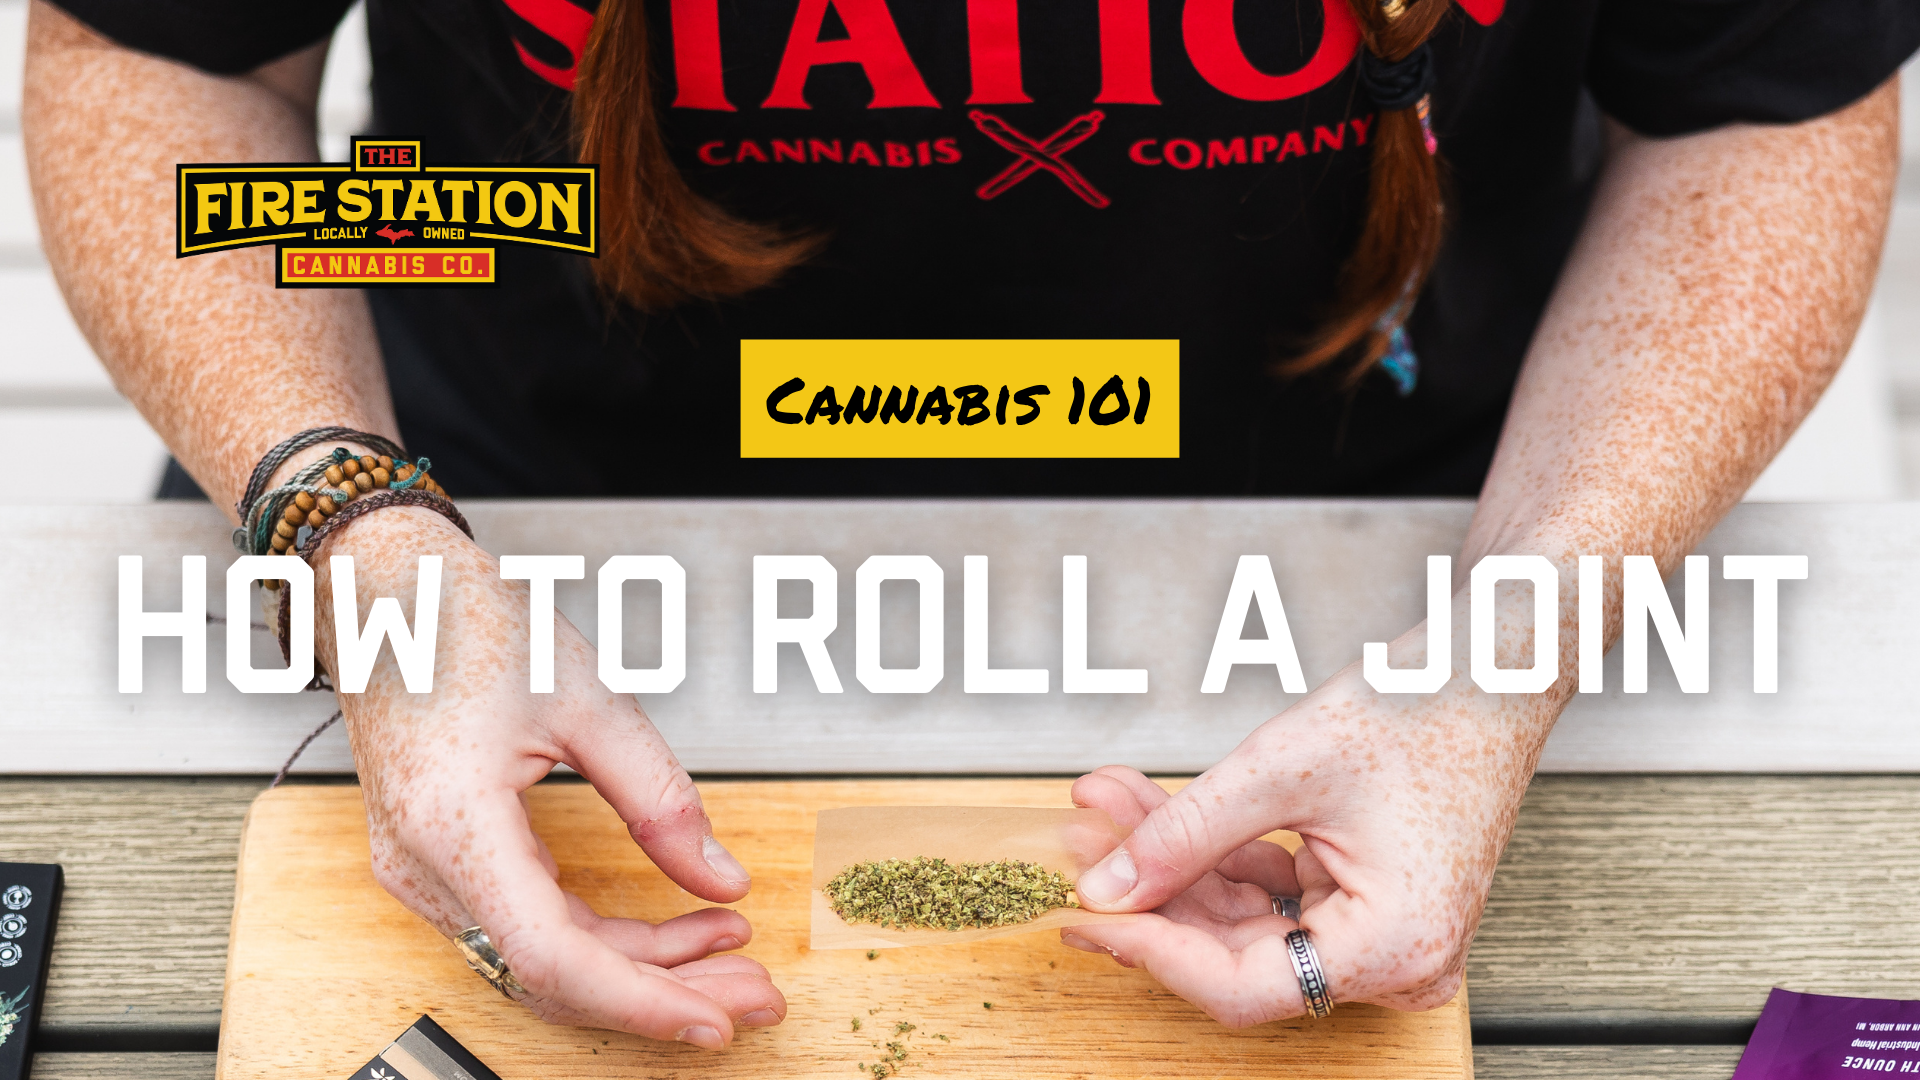 How to roll a joint with The Fire Station Cannabis Company